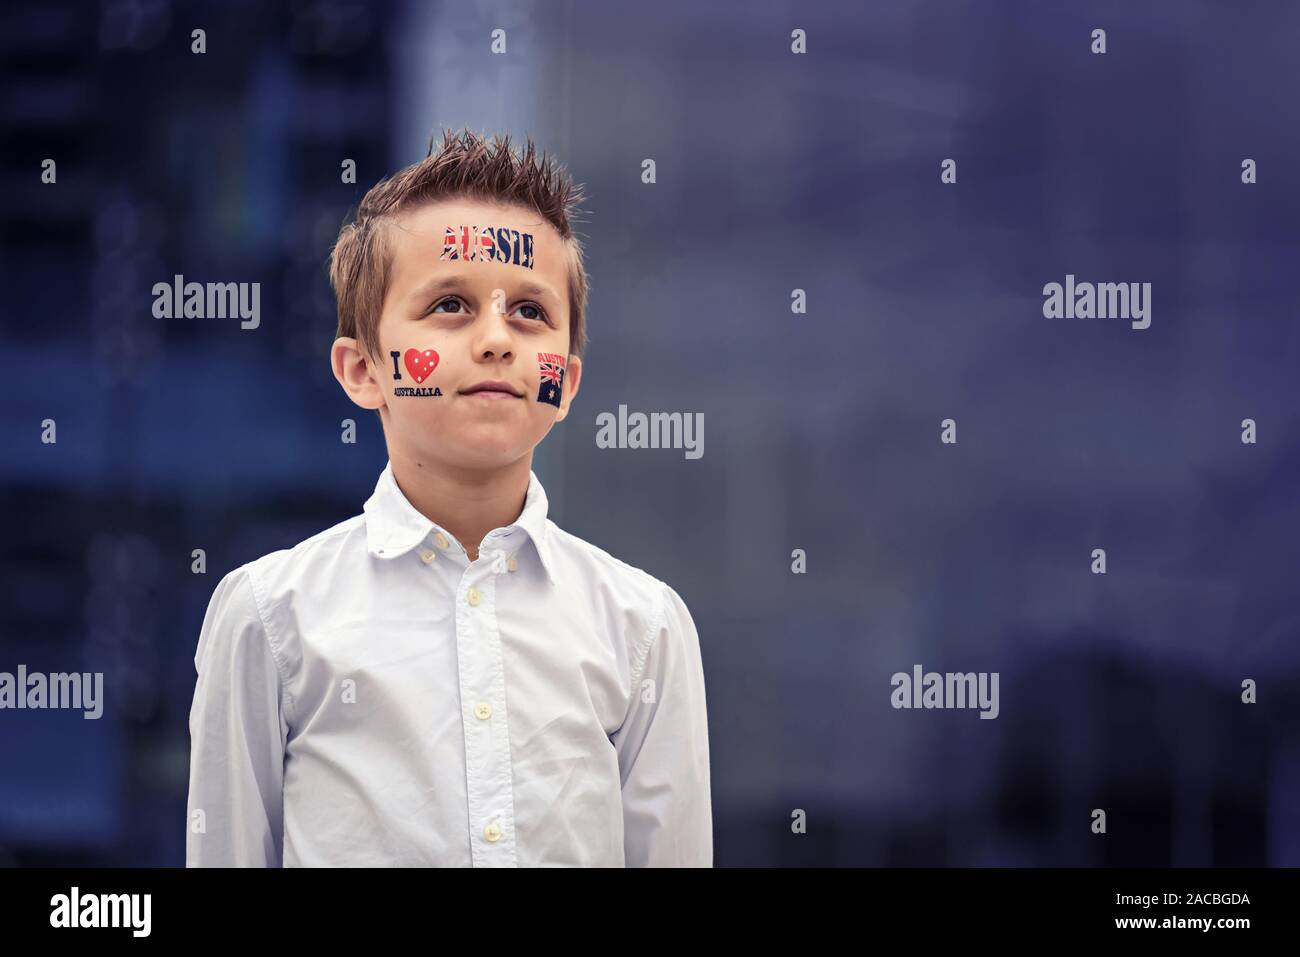 Portrait of proud Aussie boy with flag themed tattoos standing during Australian National Anthem during Australia Day celebration Stock Photo